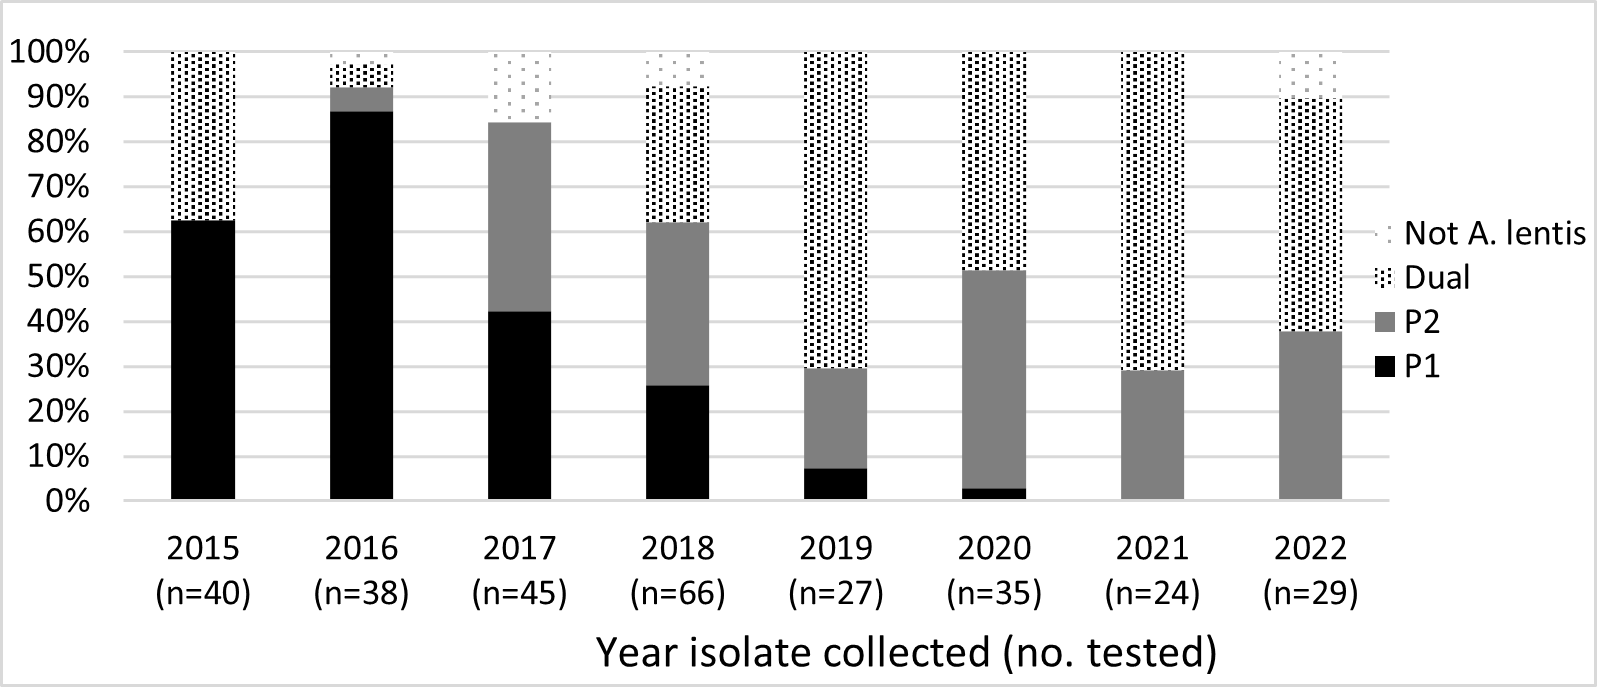 Annual testing of Ascochyta lentis isolates (n) collected from 2015 to 2022 from SA and VIC and their pathotype characterisation. Legend: P1 = pathotype 1, Nipper-virulent; P2 = pathotype 2, Hurricane-virulent; dual = combined pathotype 1 and 2; Not A. lentis = did not infect susceptible lentil check line.